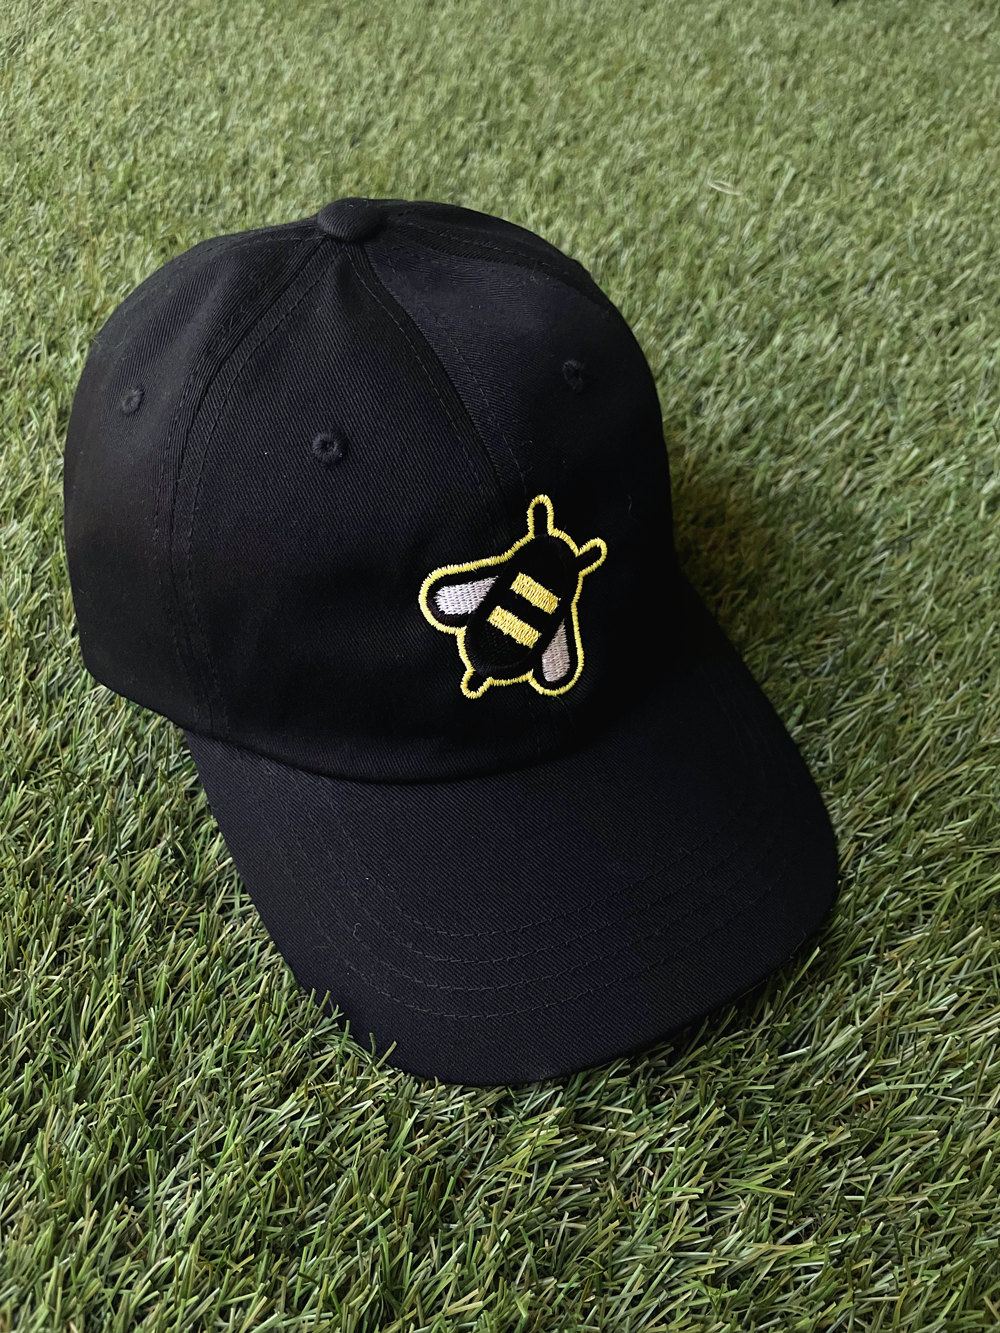 Birds and Bees - Local Buzz x TG Dad Cap/Hat